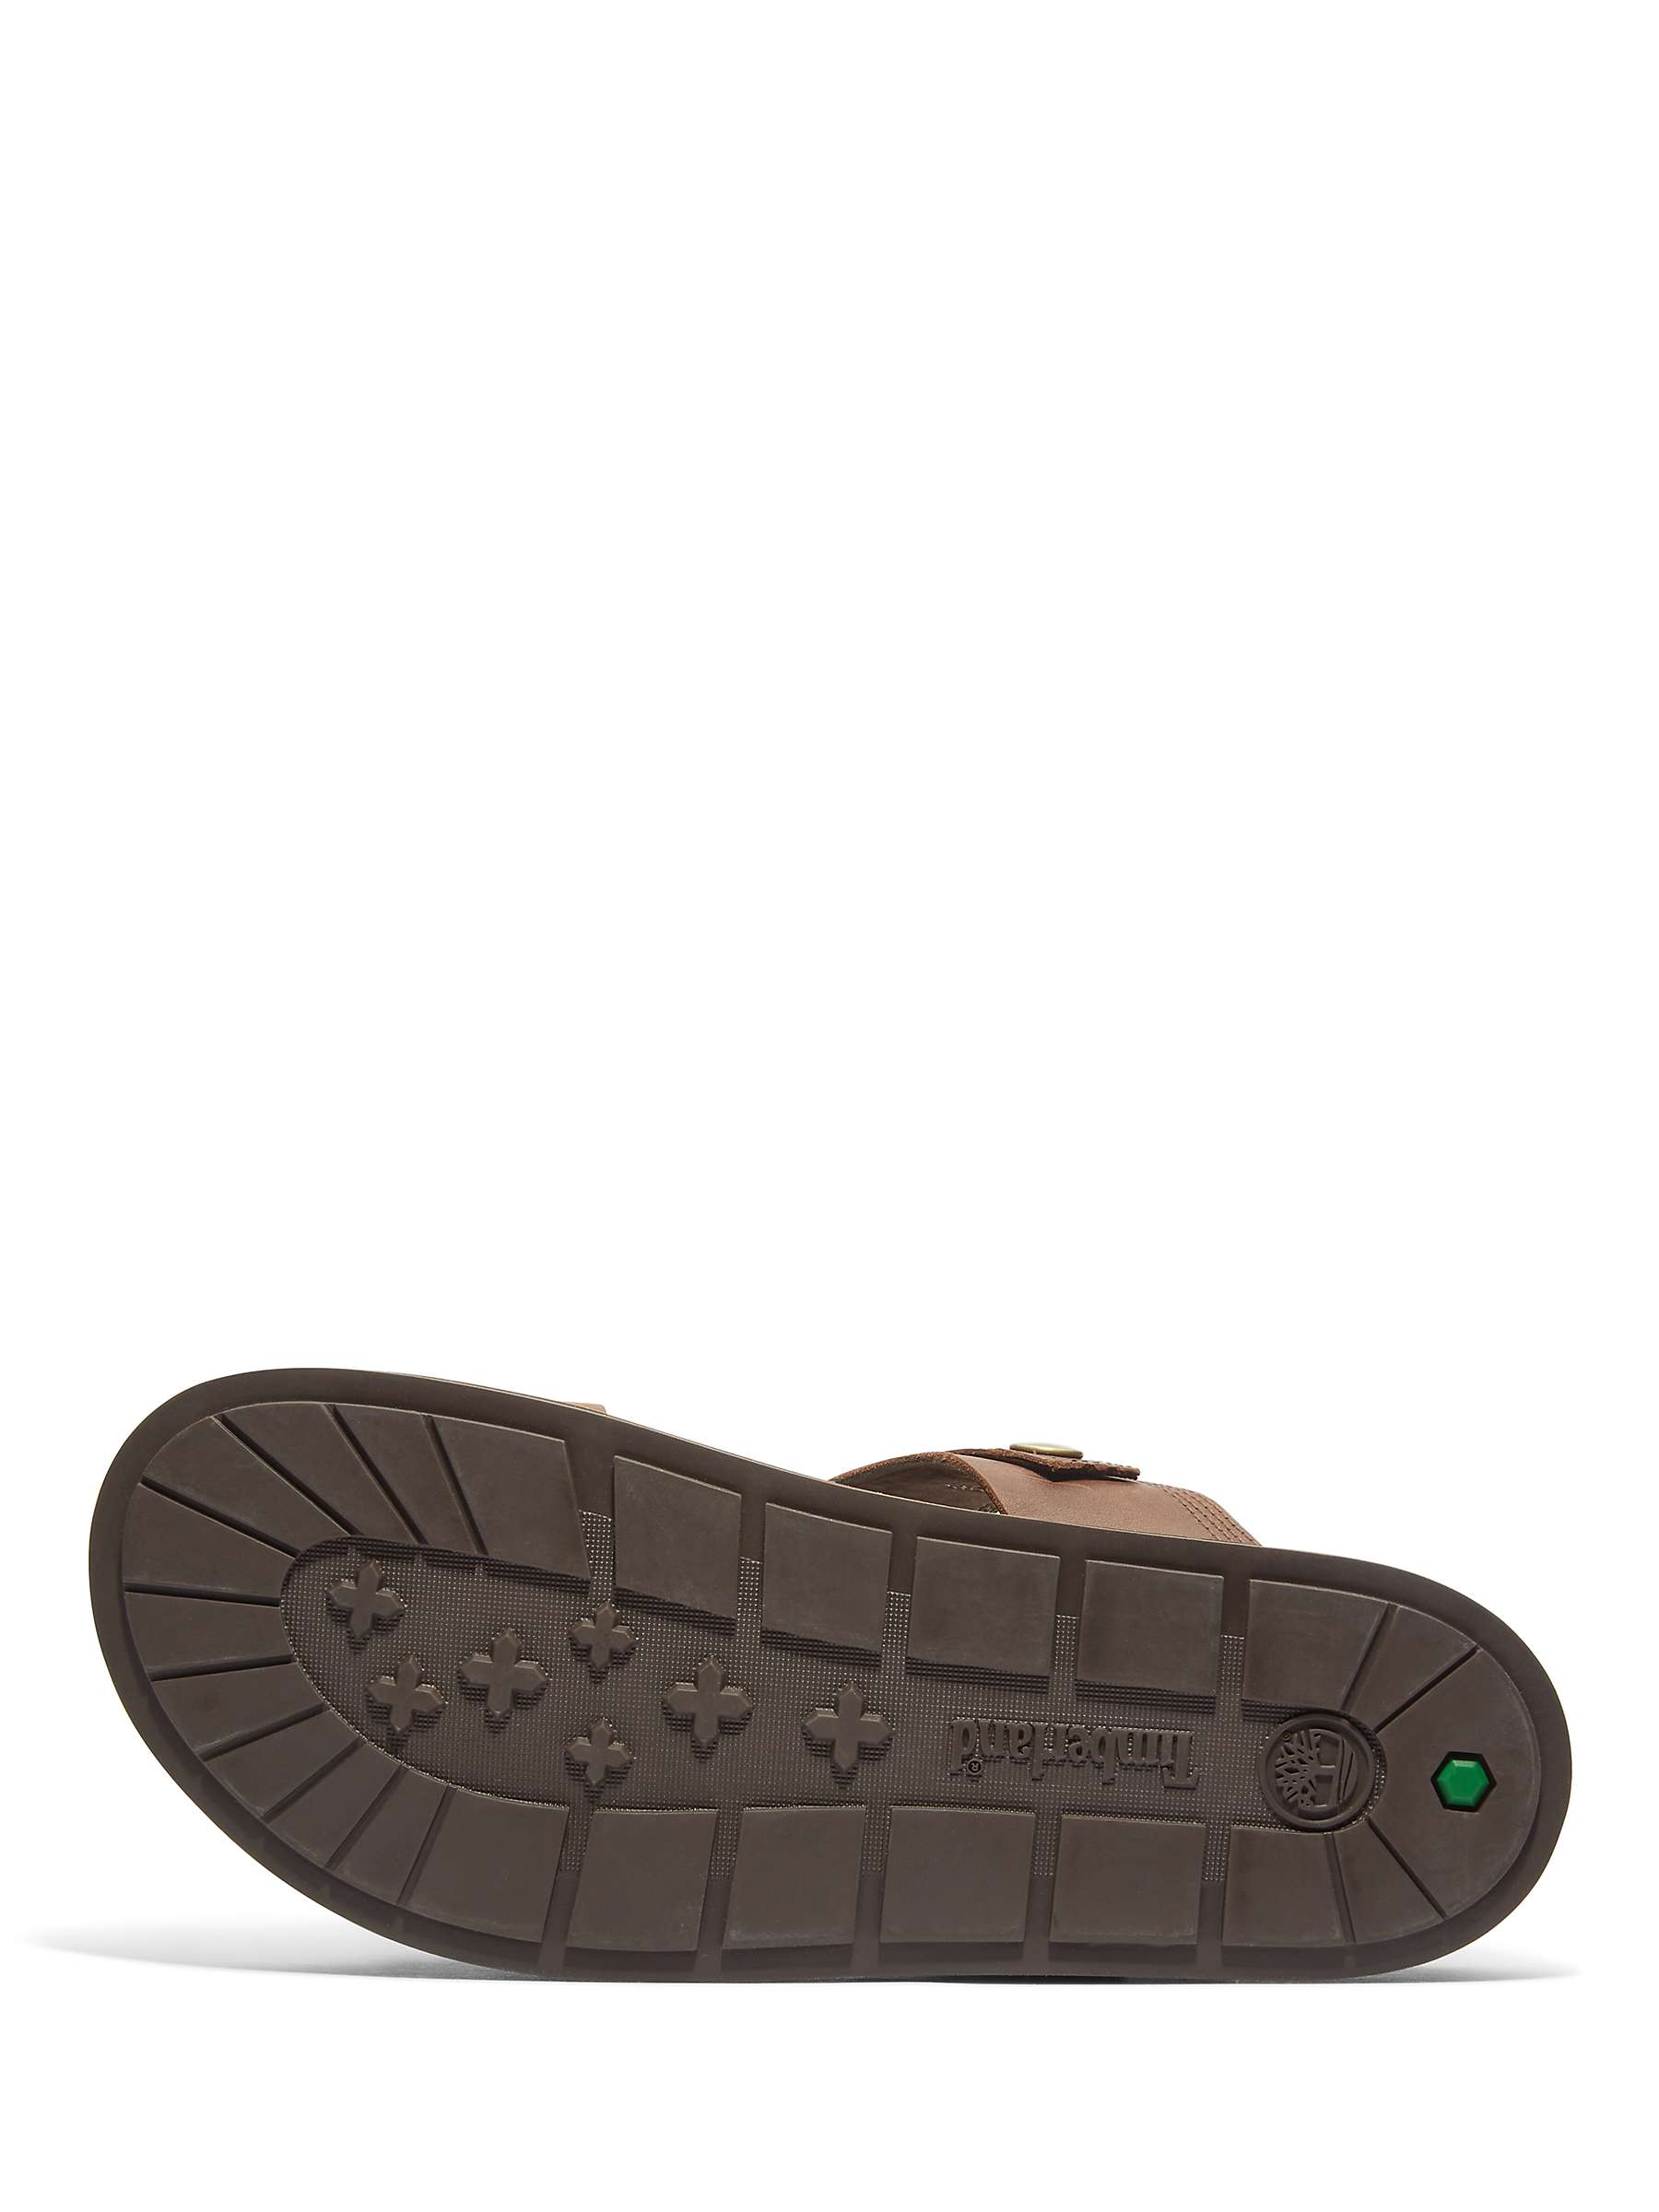 Buy Timberland Amalfi Vibes Leather Sandals, Brown Mid Online at johnlewis.com